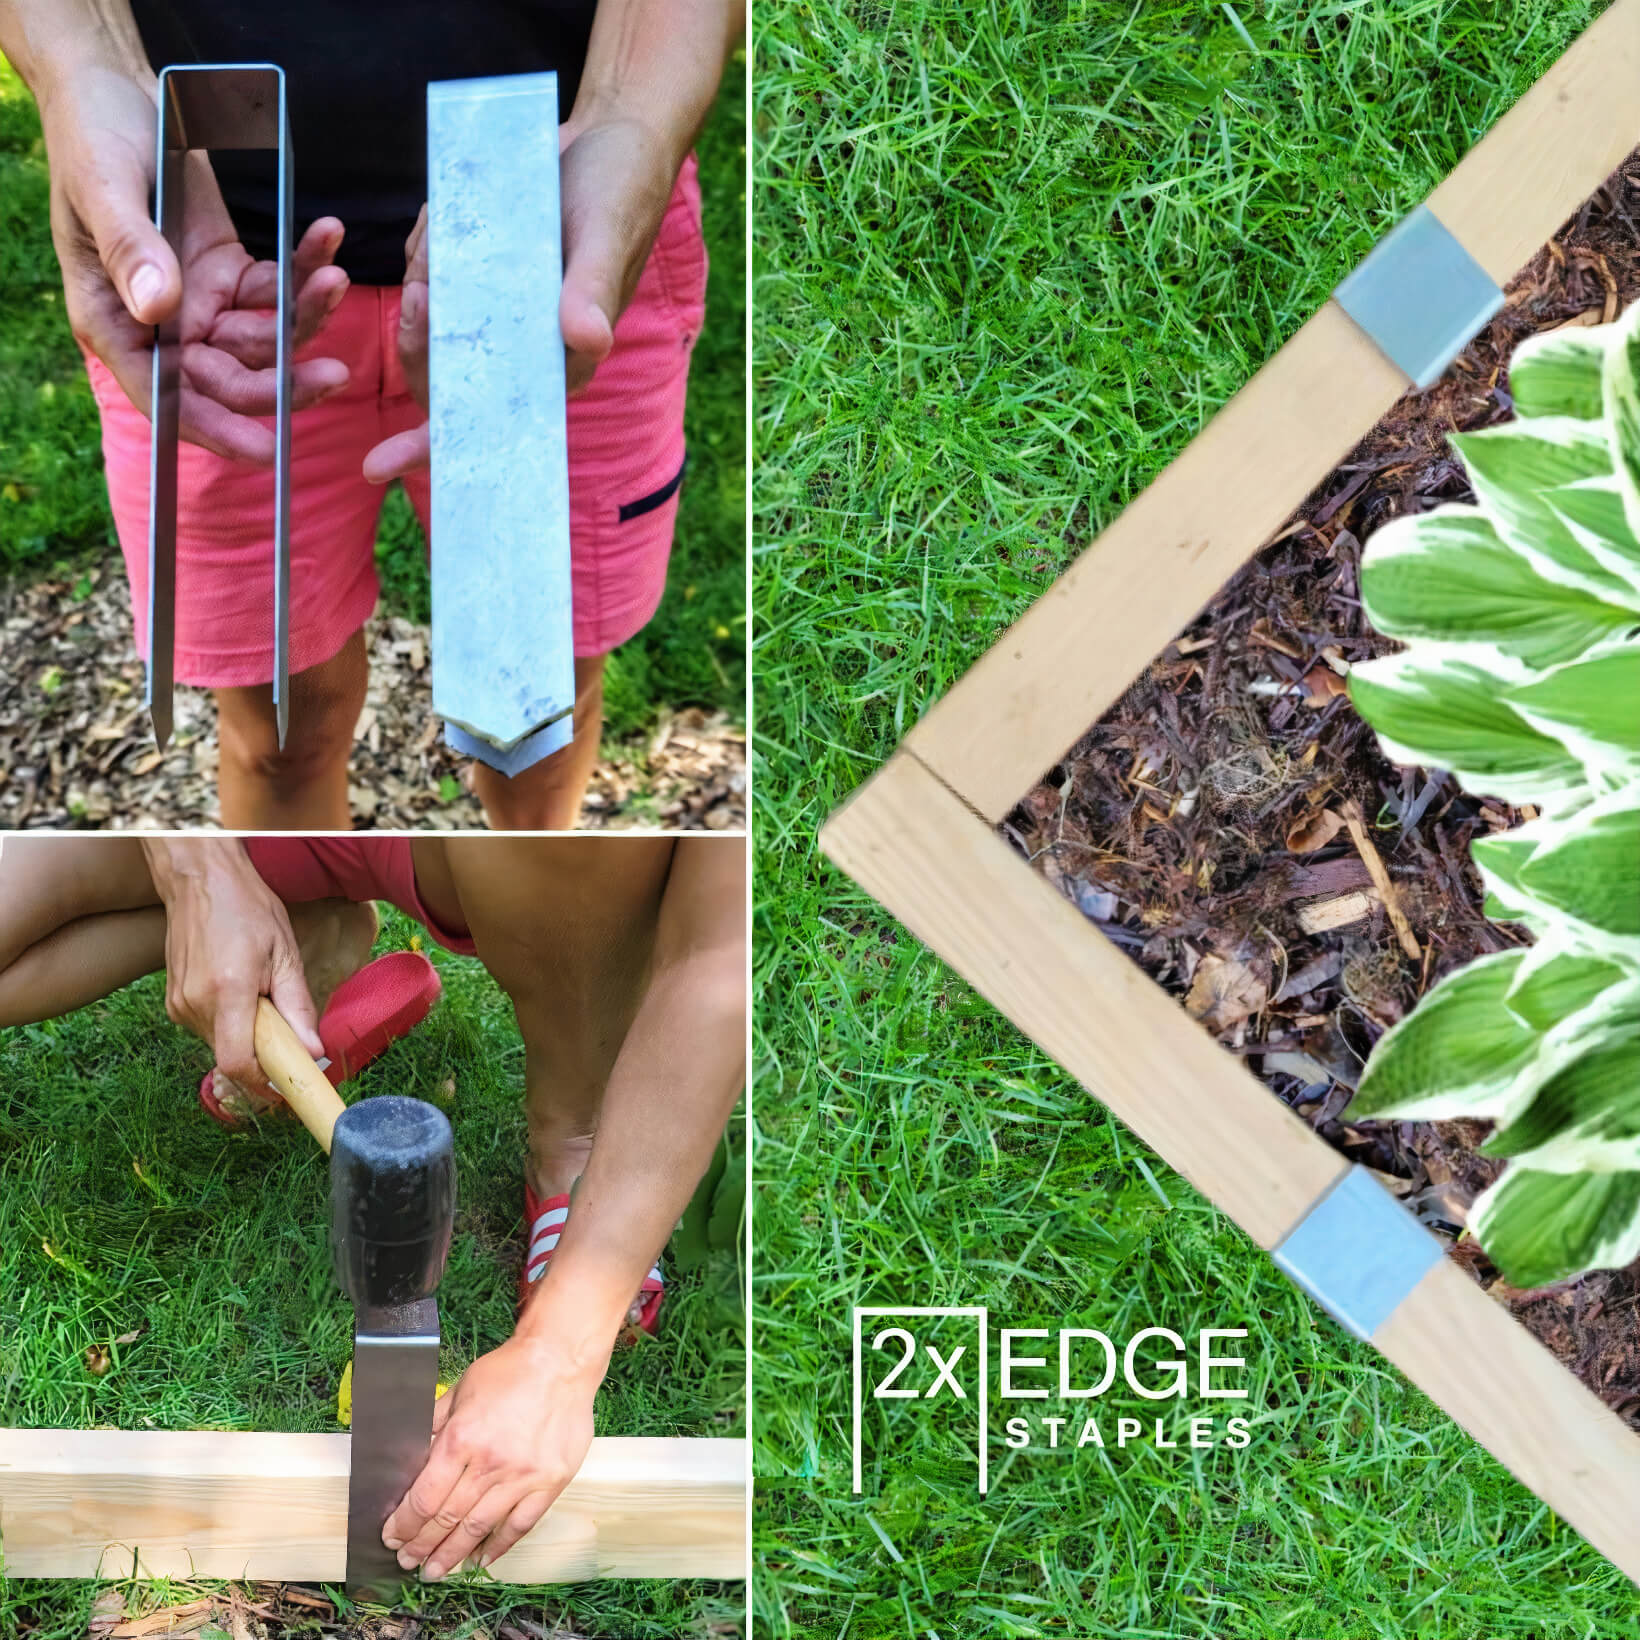 Three photos combined into one image that shows 2xEDGE creator holding 2xEDGE staples, installing a staple with a rubber mallet, and 2x4 wood installed as landscape edging.